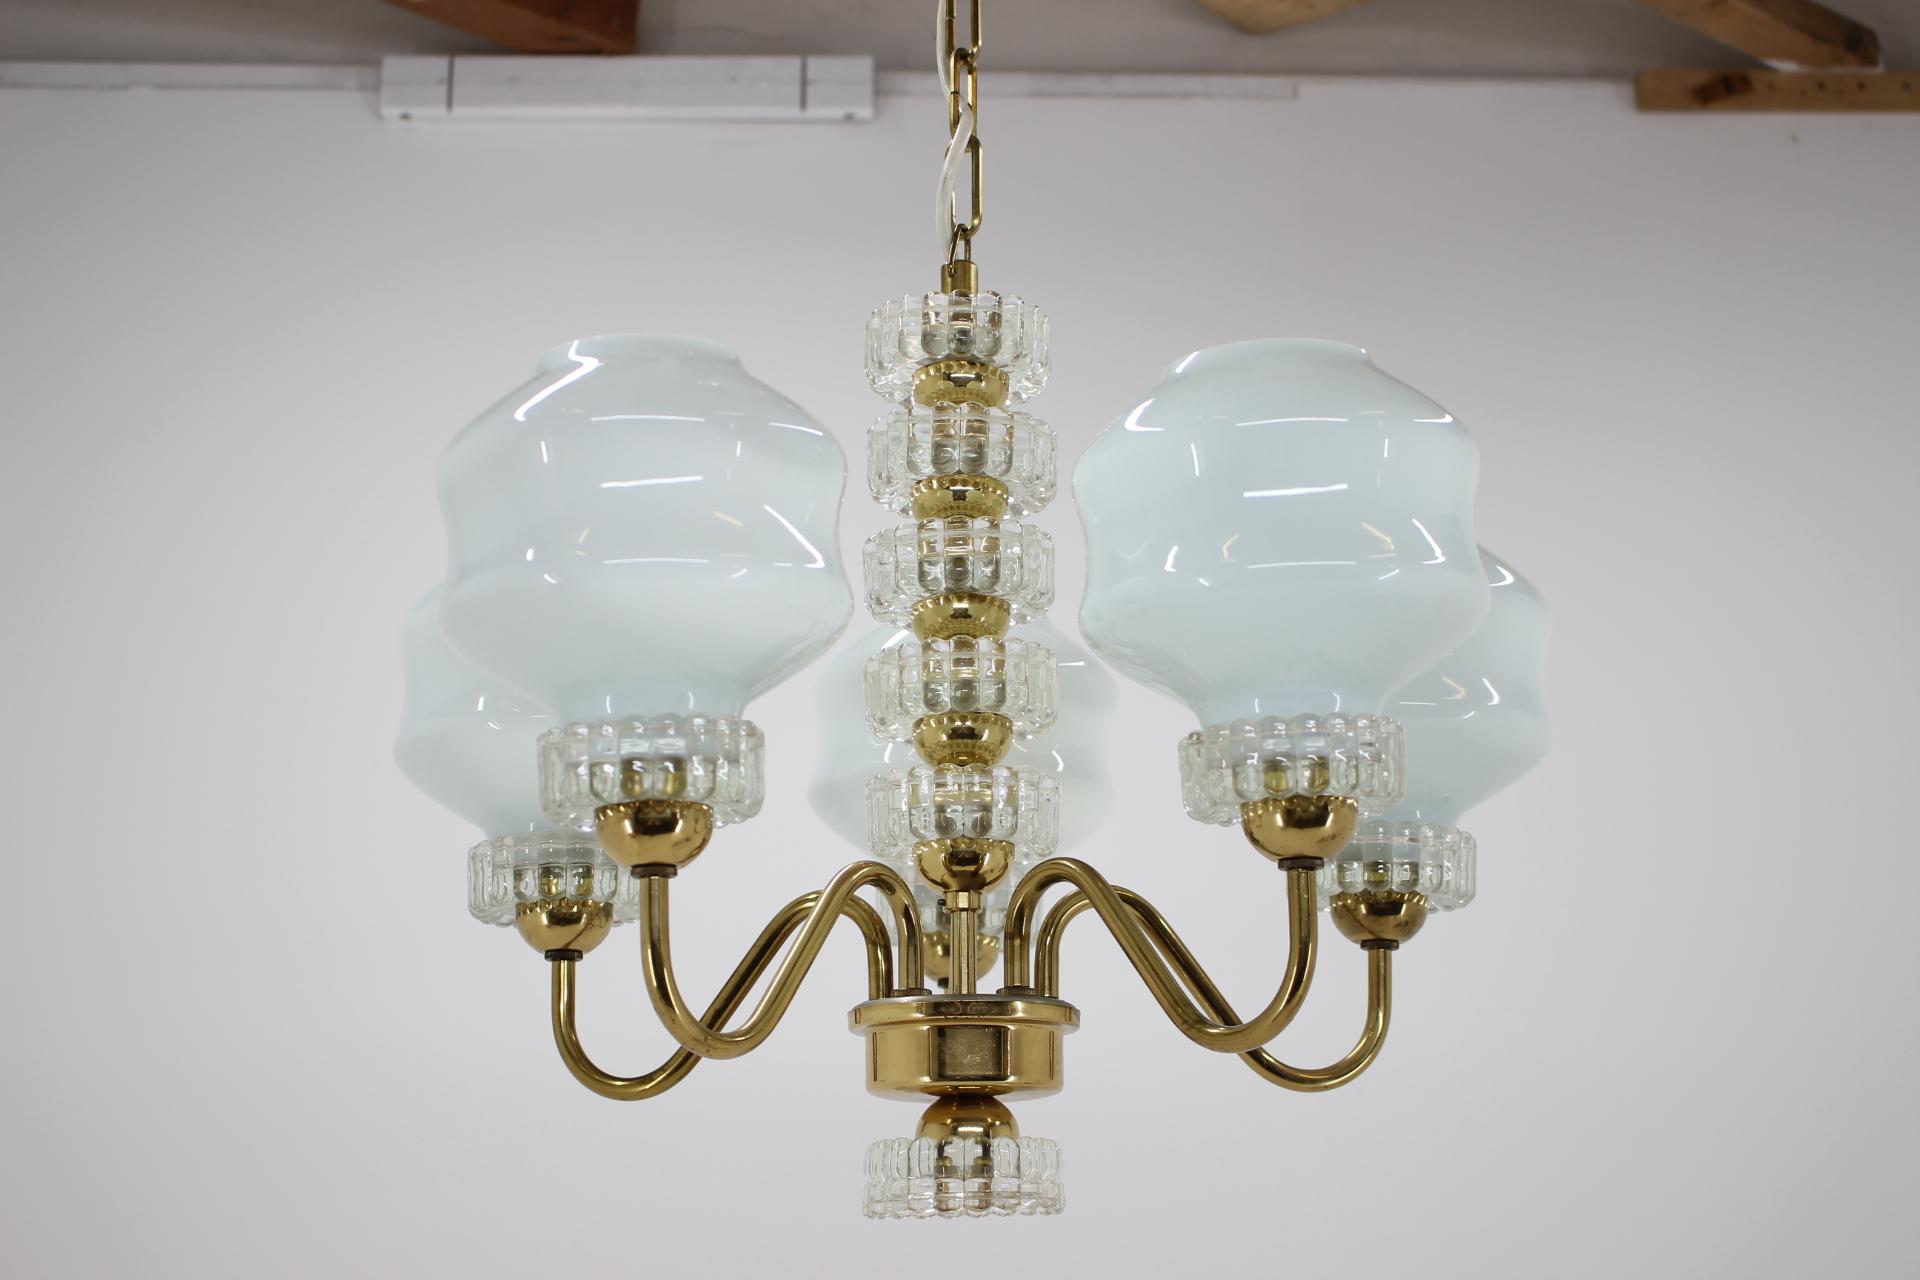 - made in Czechoslovakia
- made of brass, glass
- maker Kamenický Šenov
- re-polished
- dimension of wall lamp: height:26cm, width:40cm, depht:19cm
- very good original condition
- fully functional